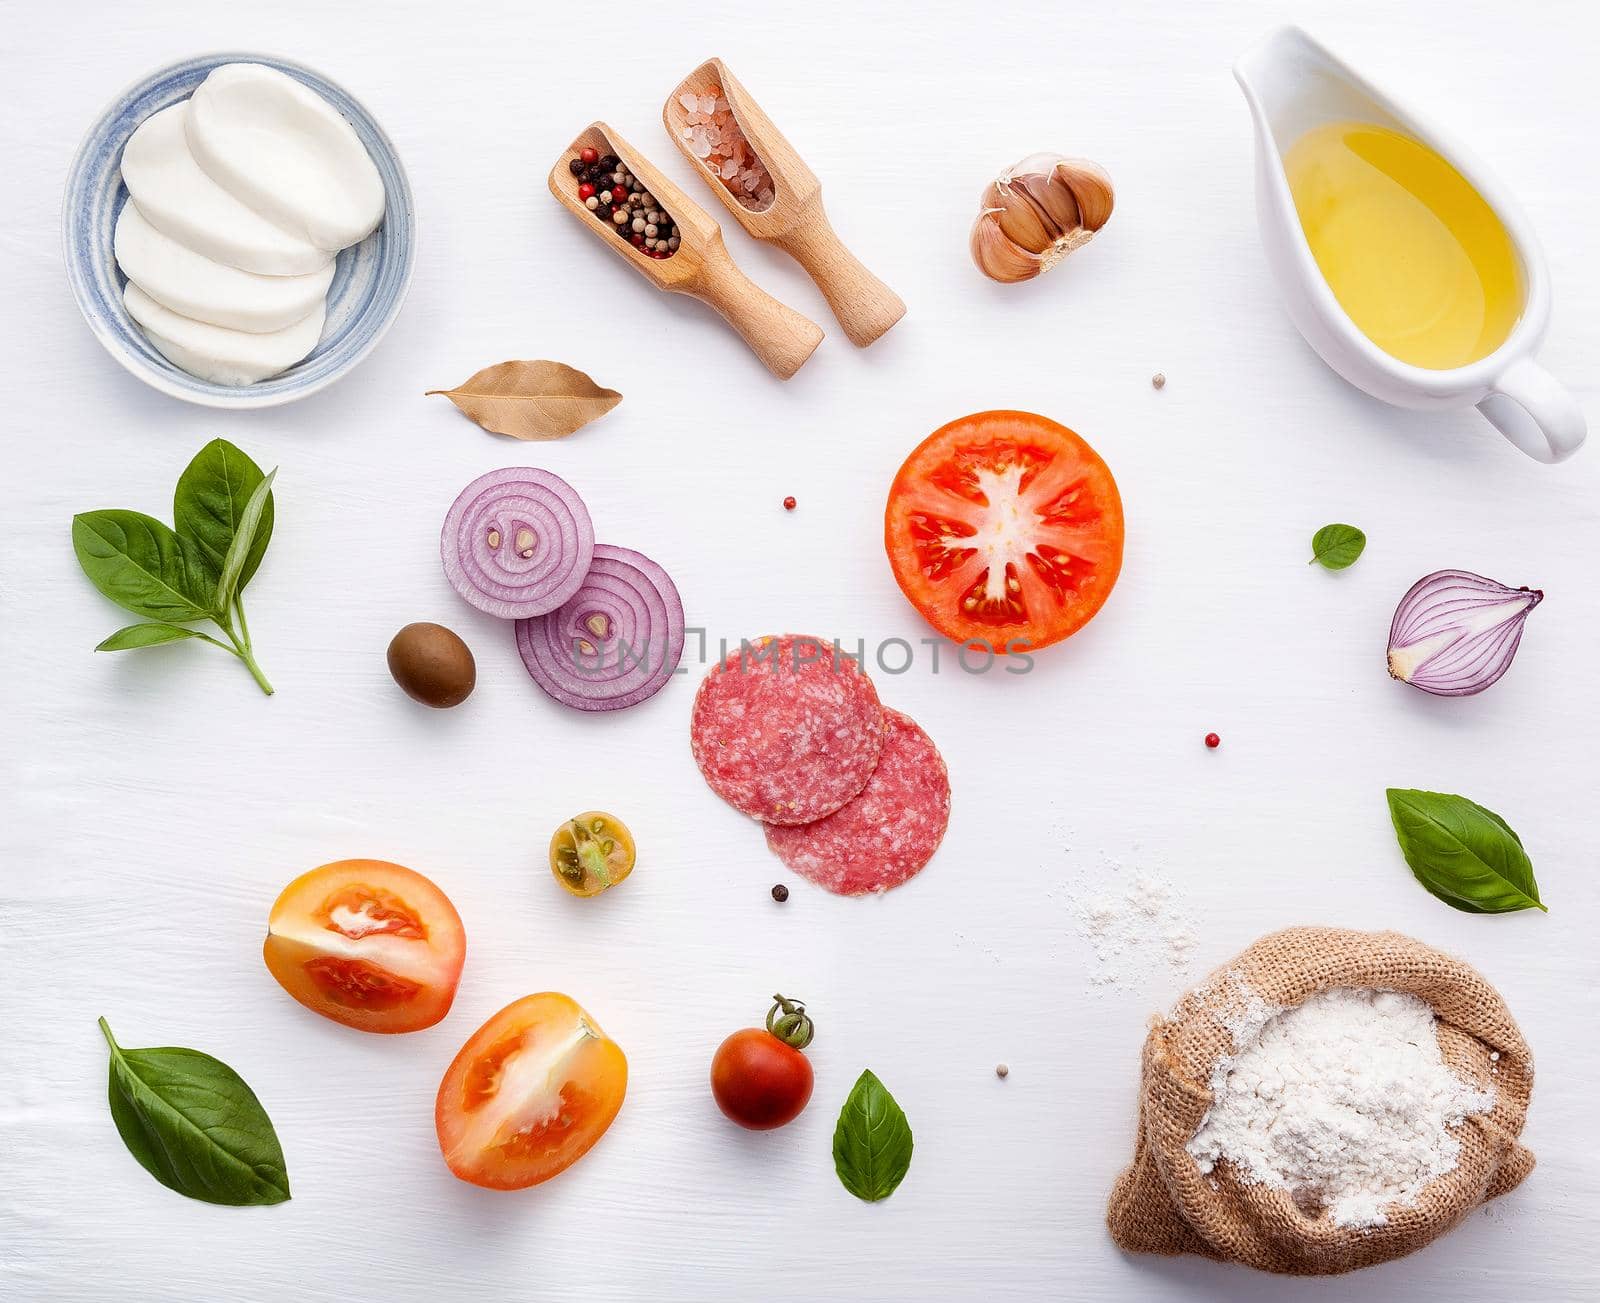 The ingredients for homemade pizza on white wooden background. by kerdkanno